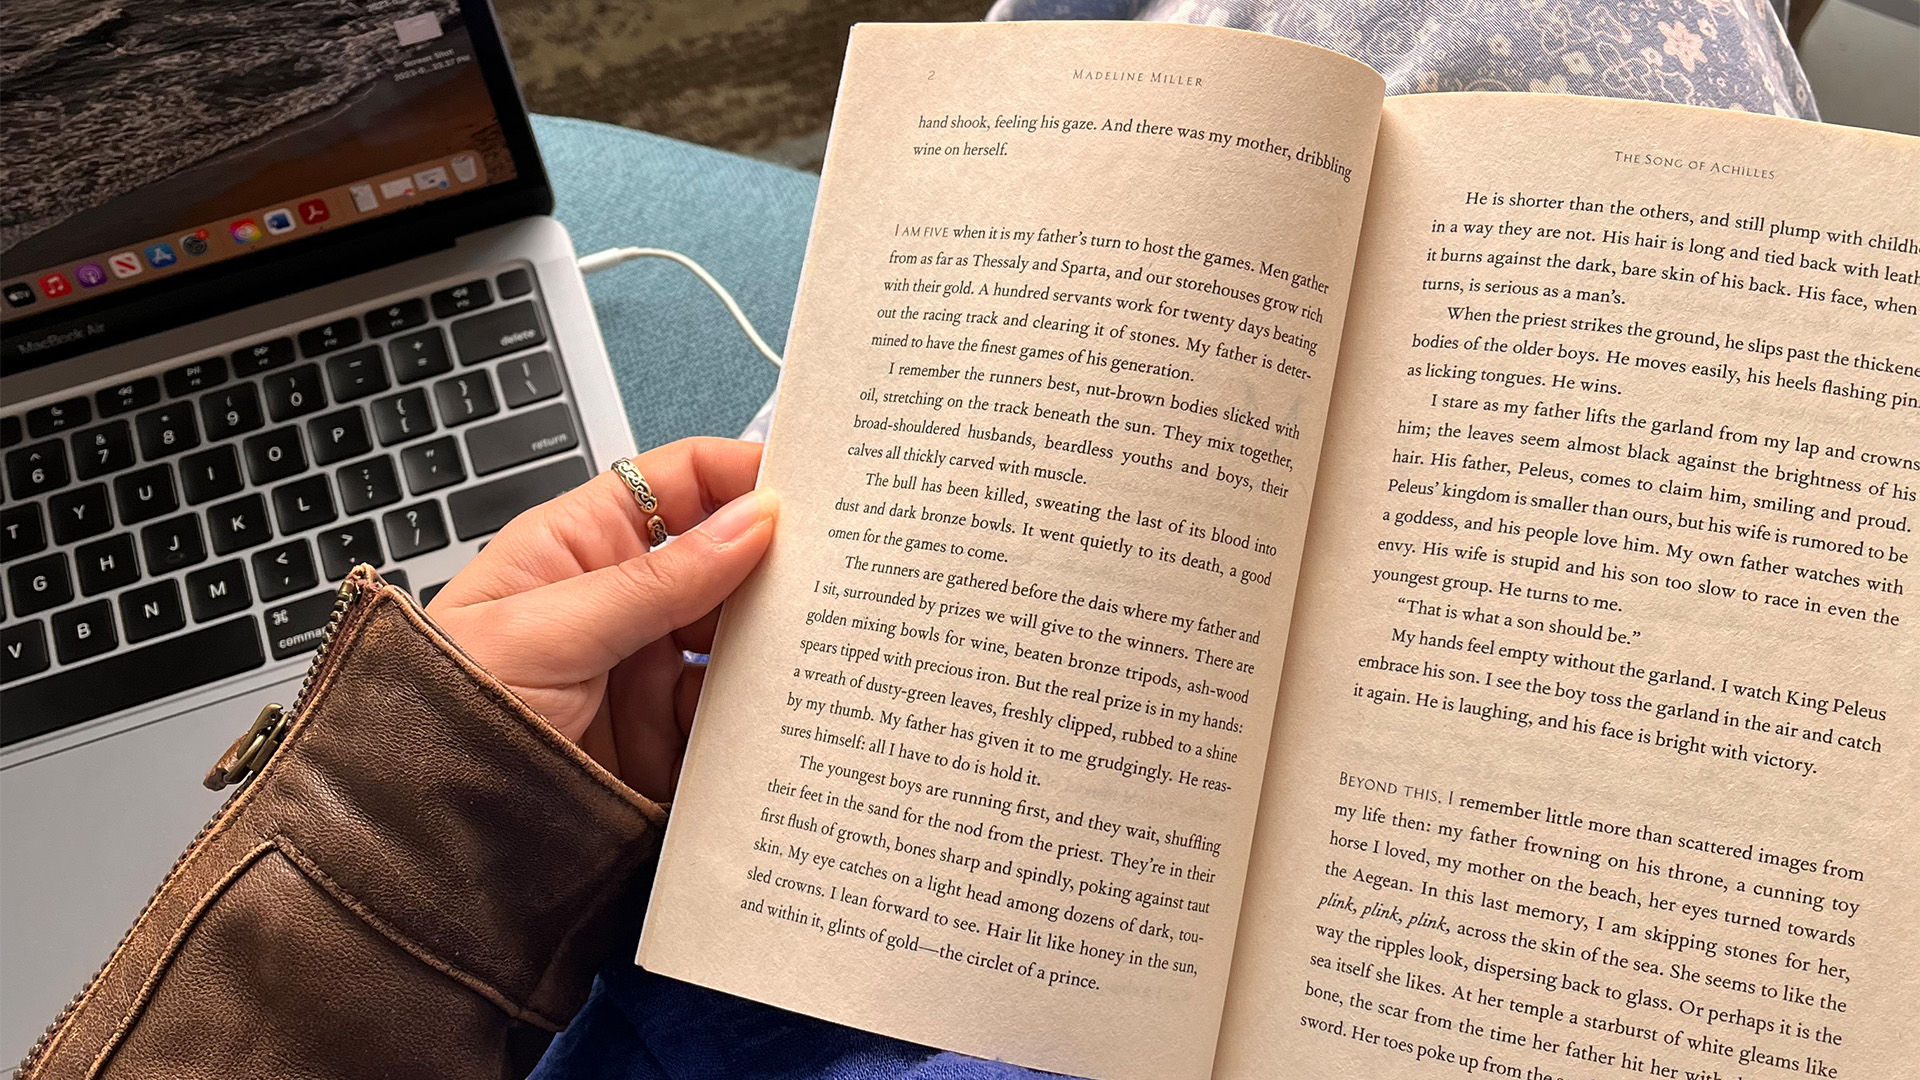 Open book, hand holding the left side of the page, computer sitting next to book